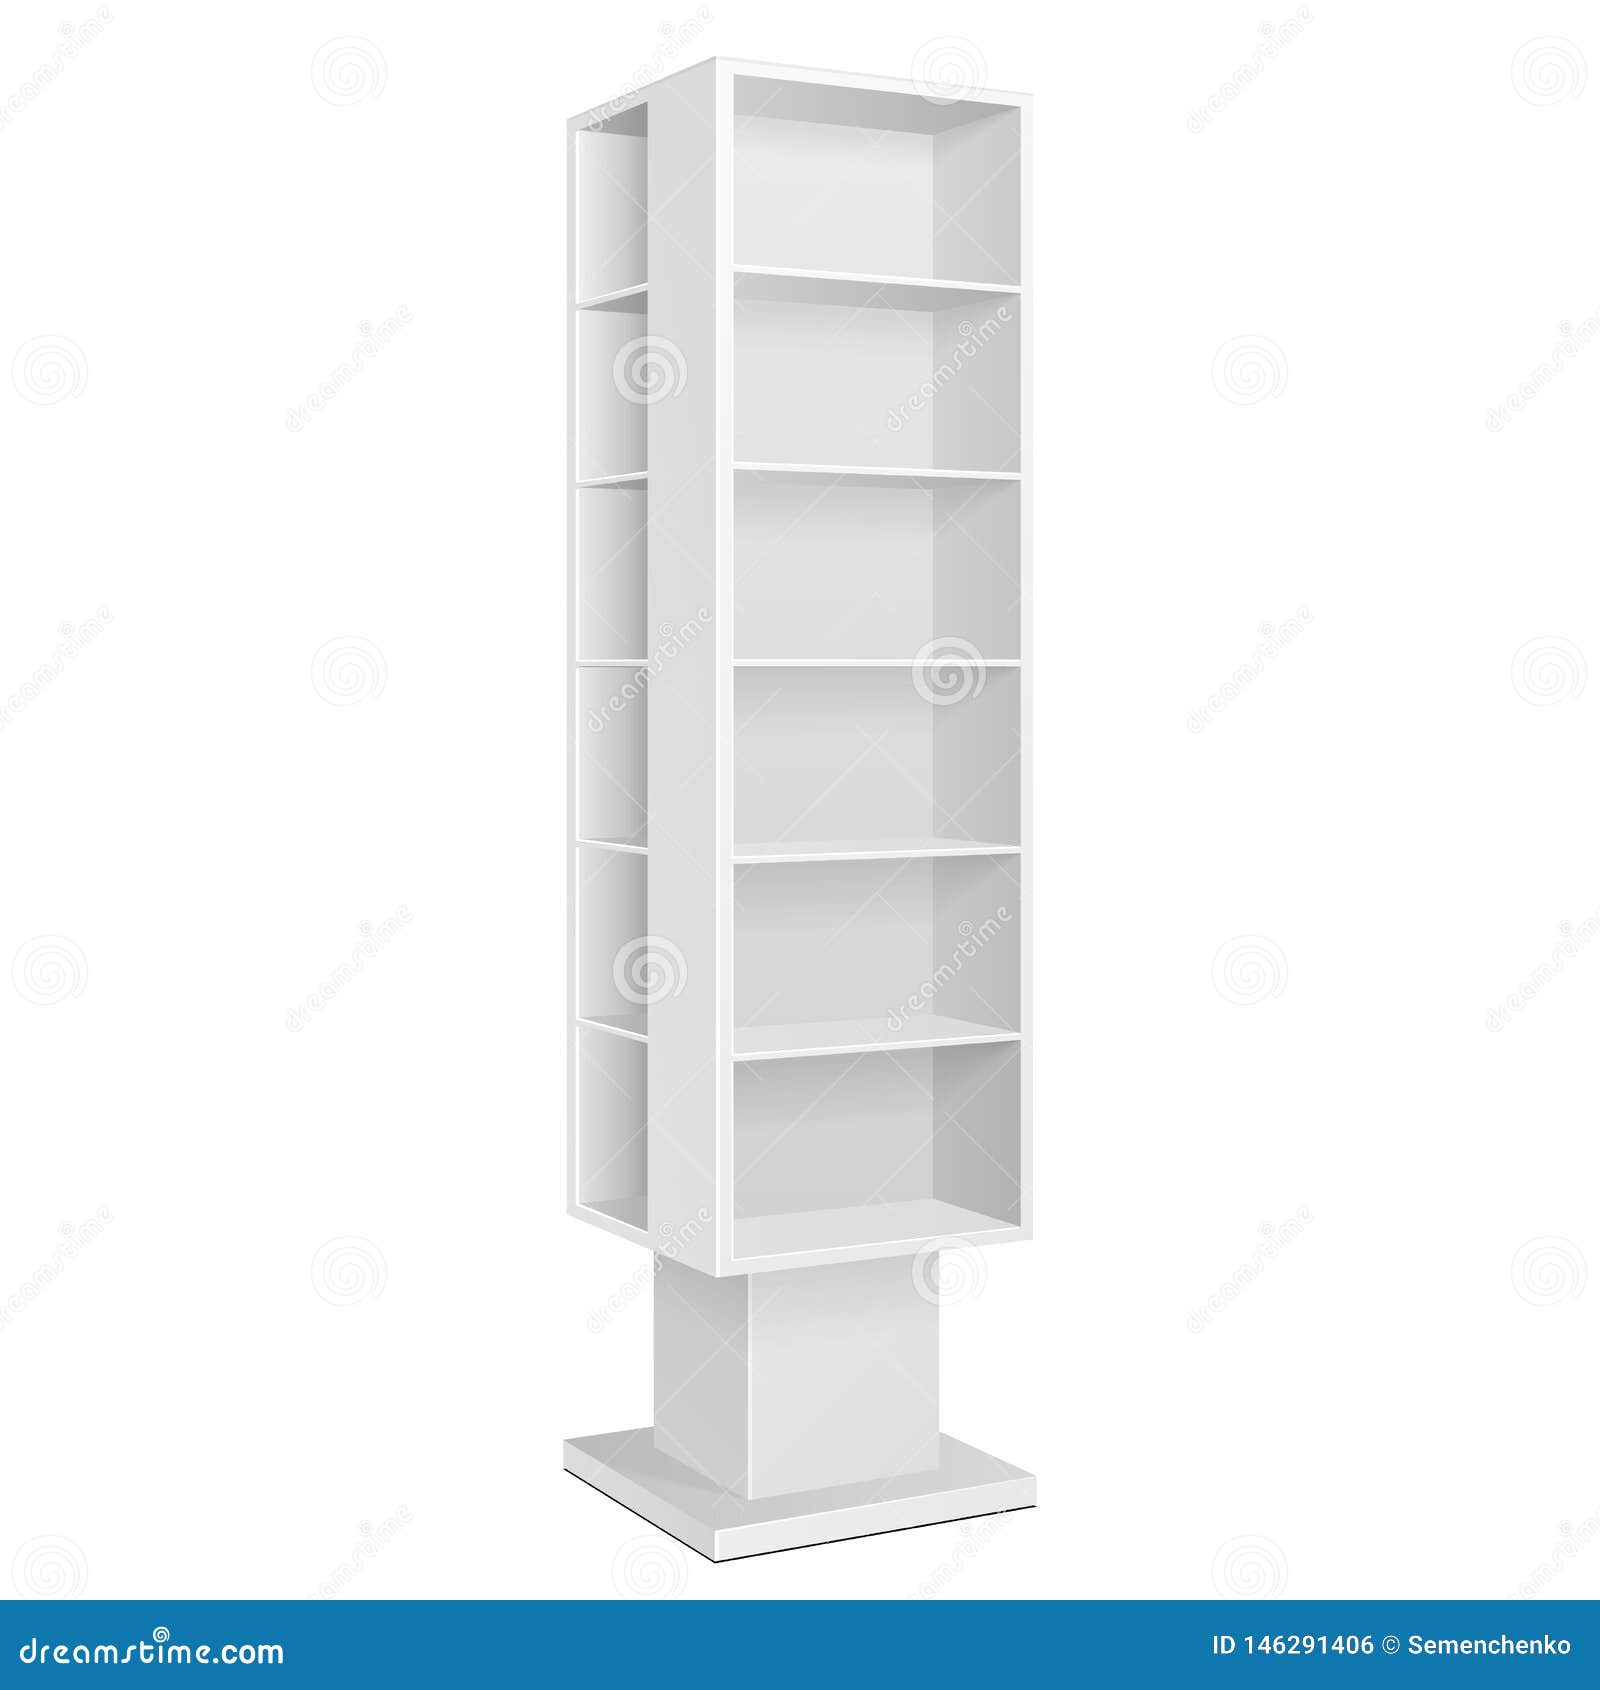 white blank quadrilateral empty showcase displays with retail shelves products on white background .